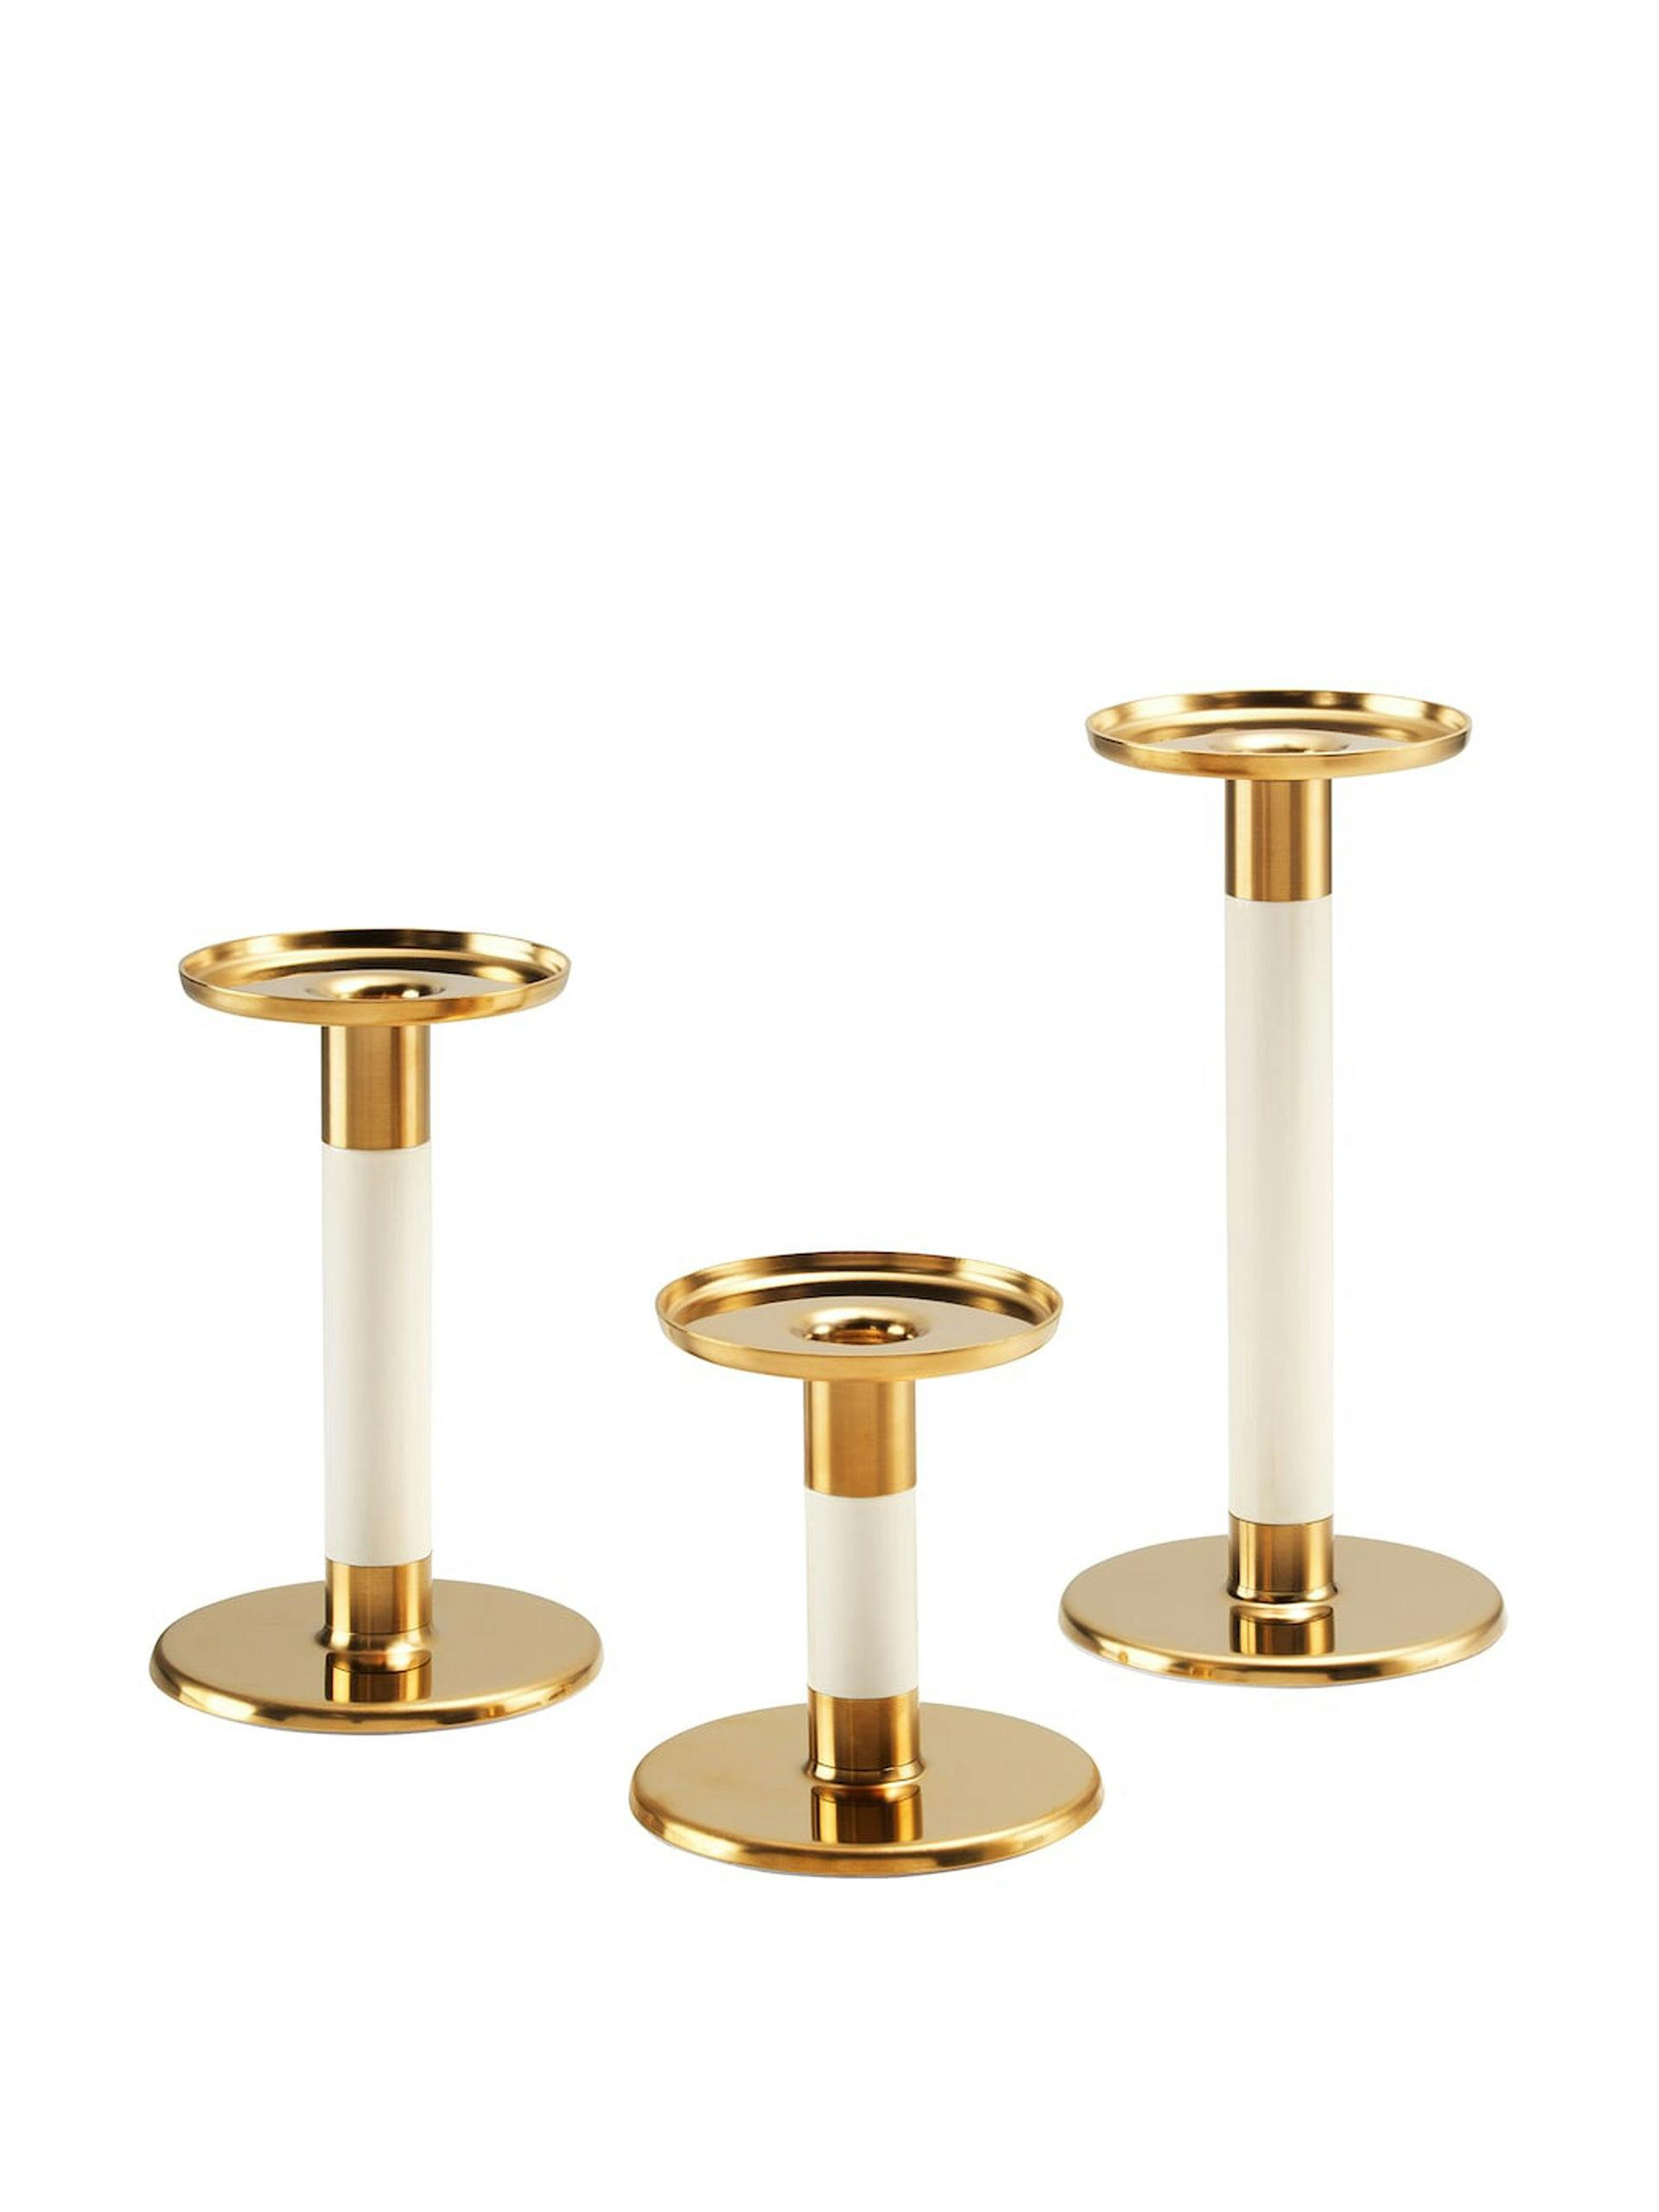 Gold and ivory candlesticks (set of 3)